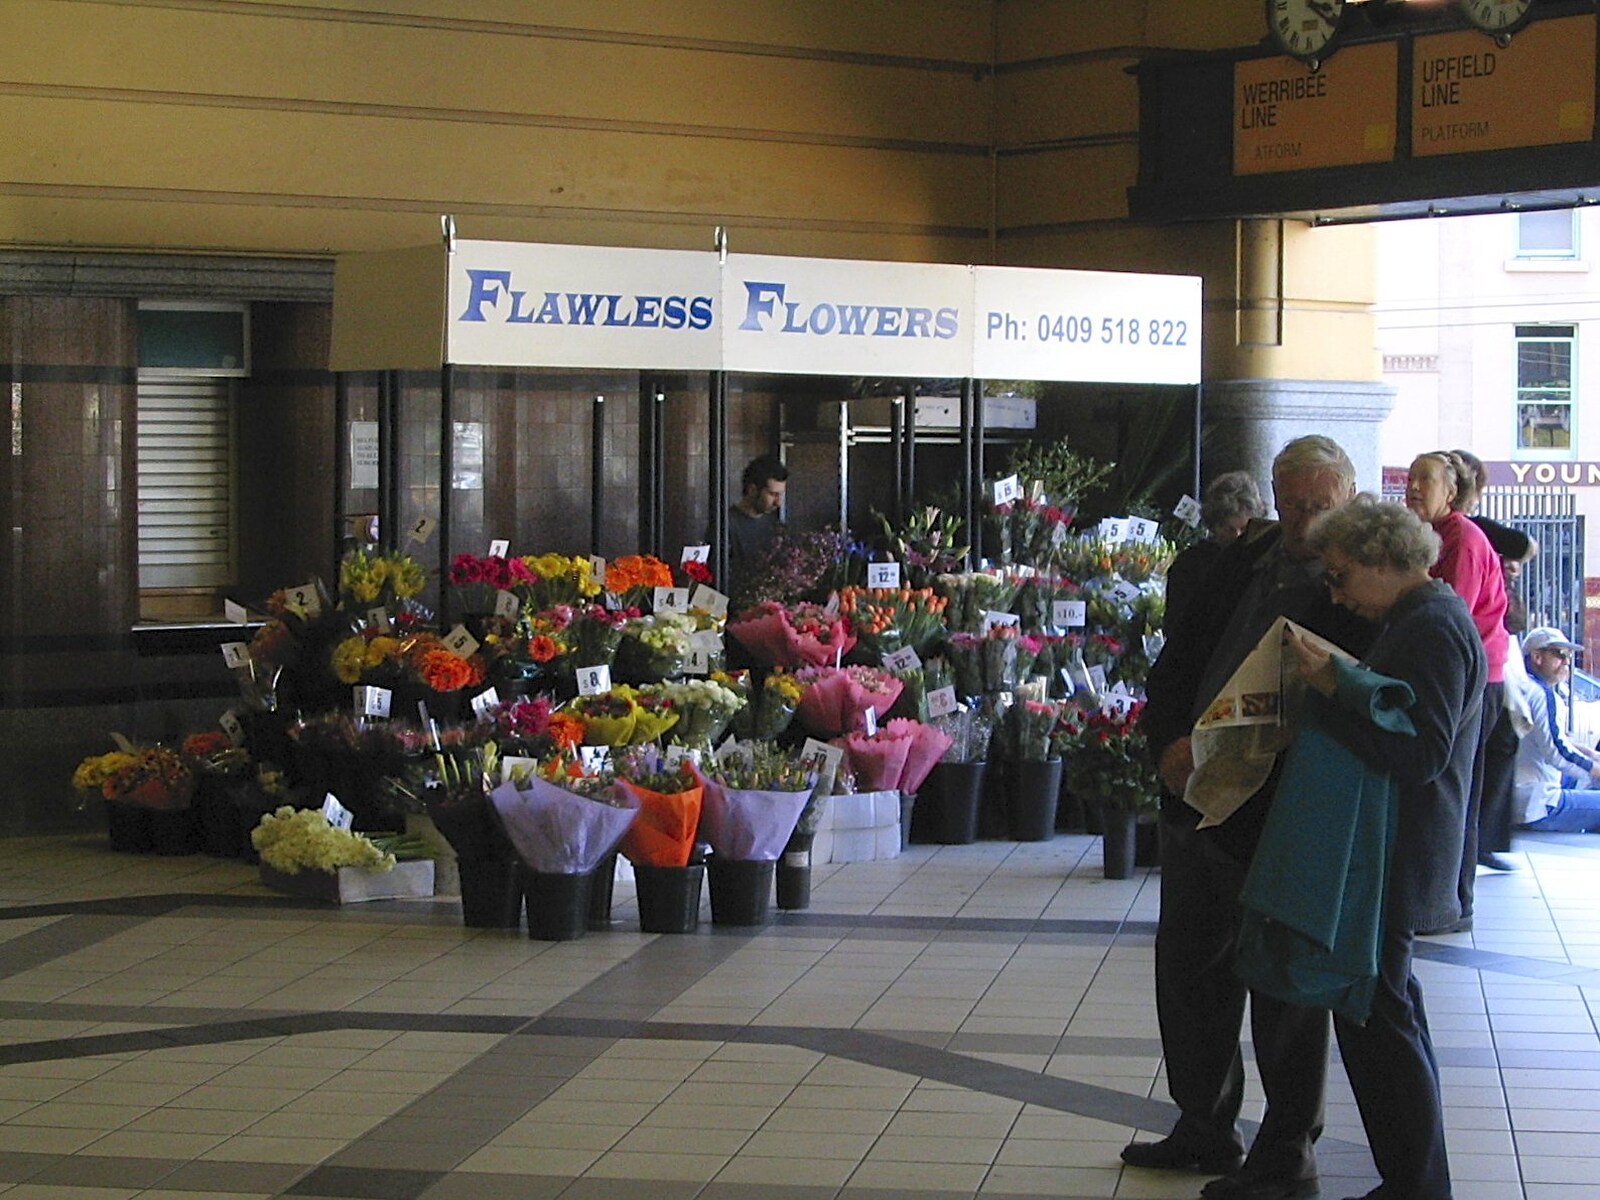 Flawless Flowers in Flinder's Street station from A Couple of Days in Melbourne, Victoria, Australia - 5th October 2004